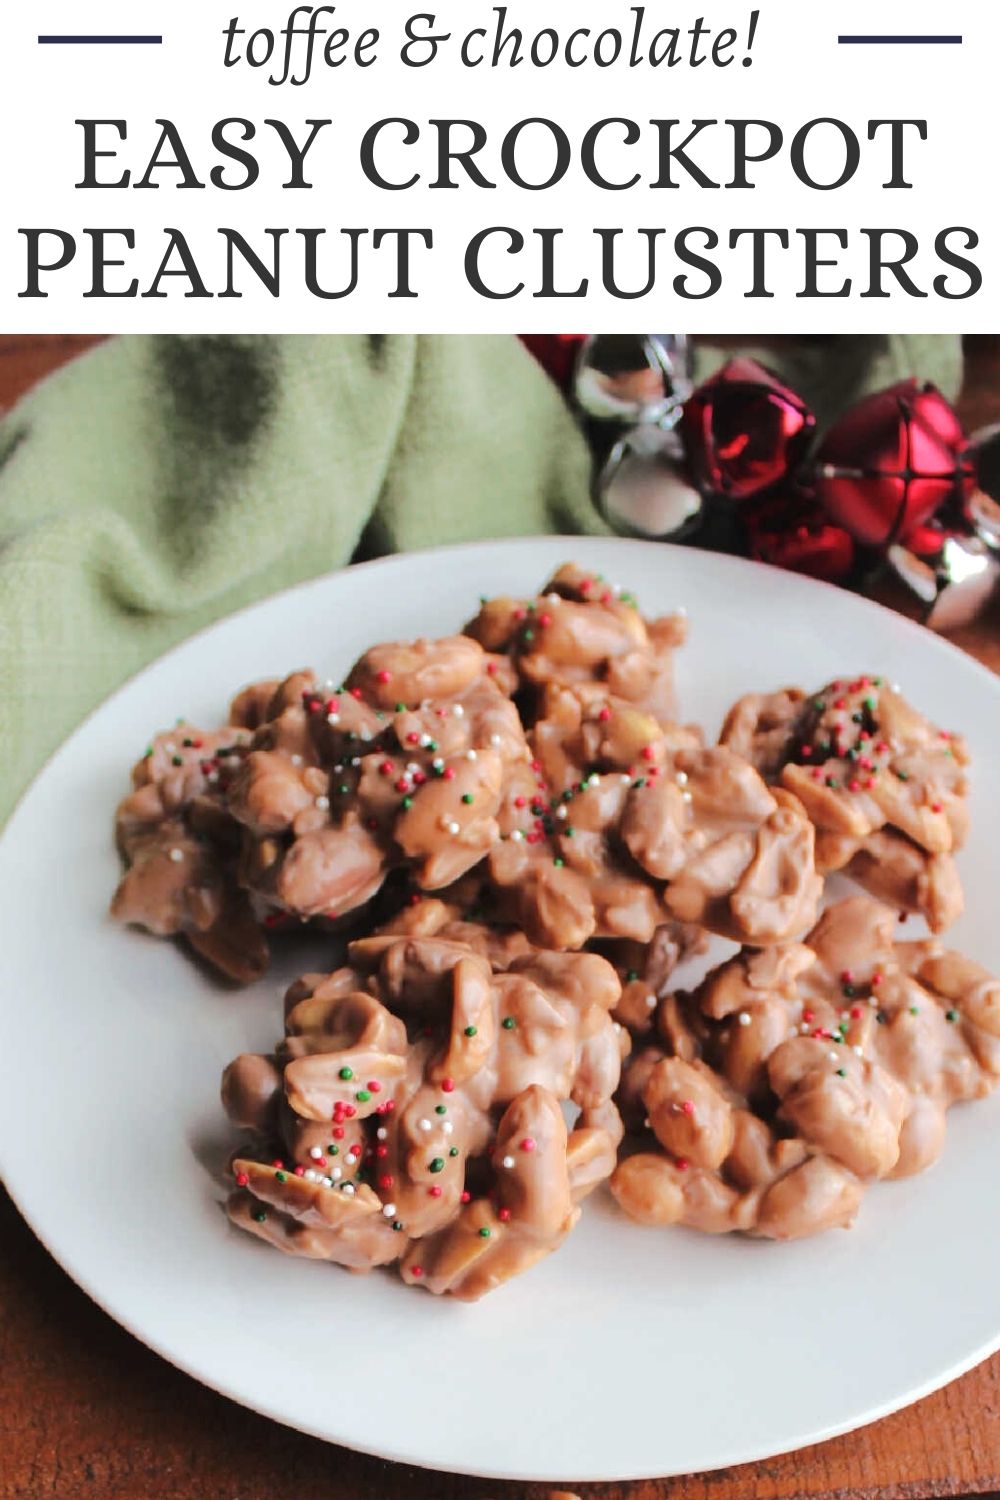 Easy crockpot peanut clusters only take a handful of ingredients to make. They have a creamy chocolate coating with bits of toffee and plenty of peanut goodness. If you can stir, you can make these tasty candies.